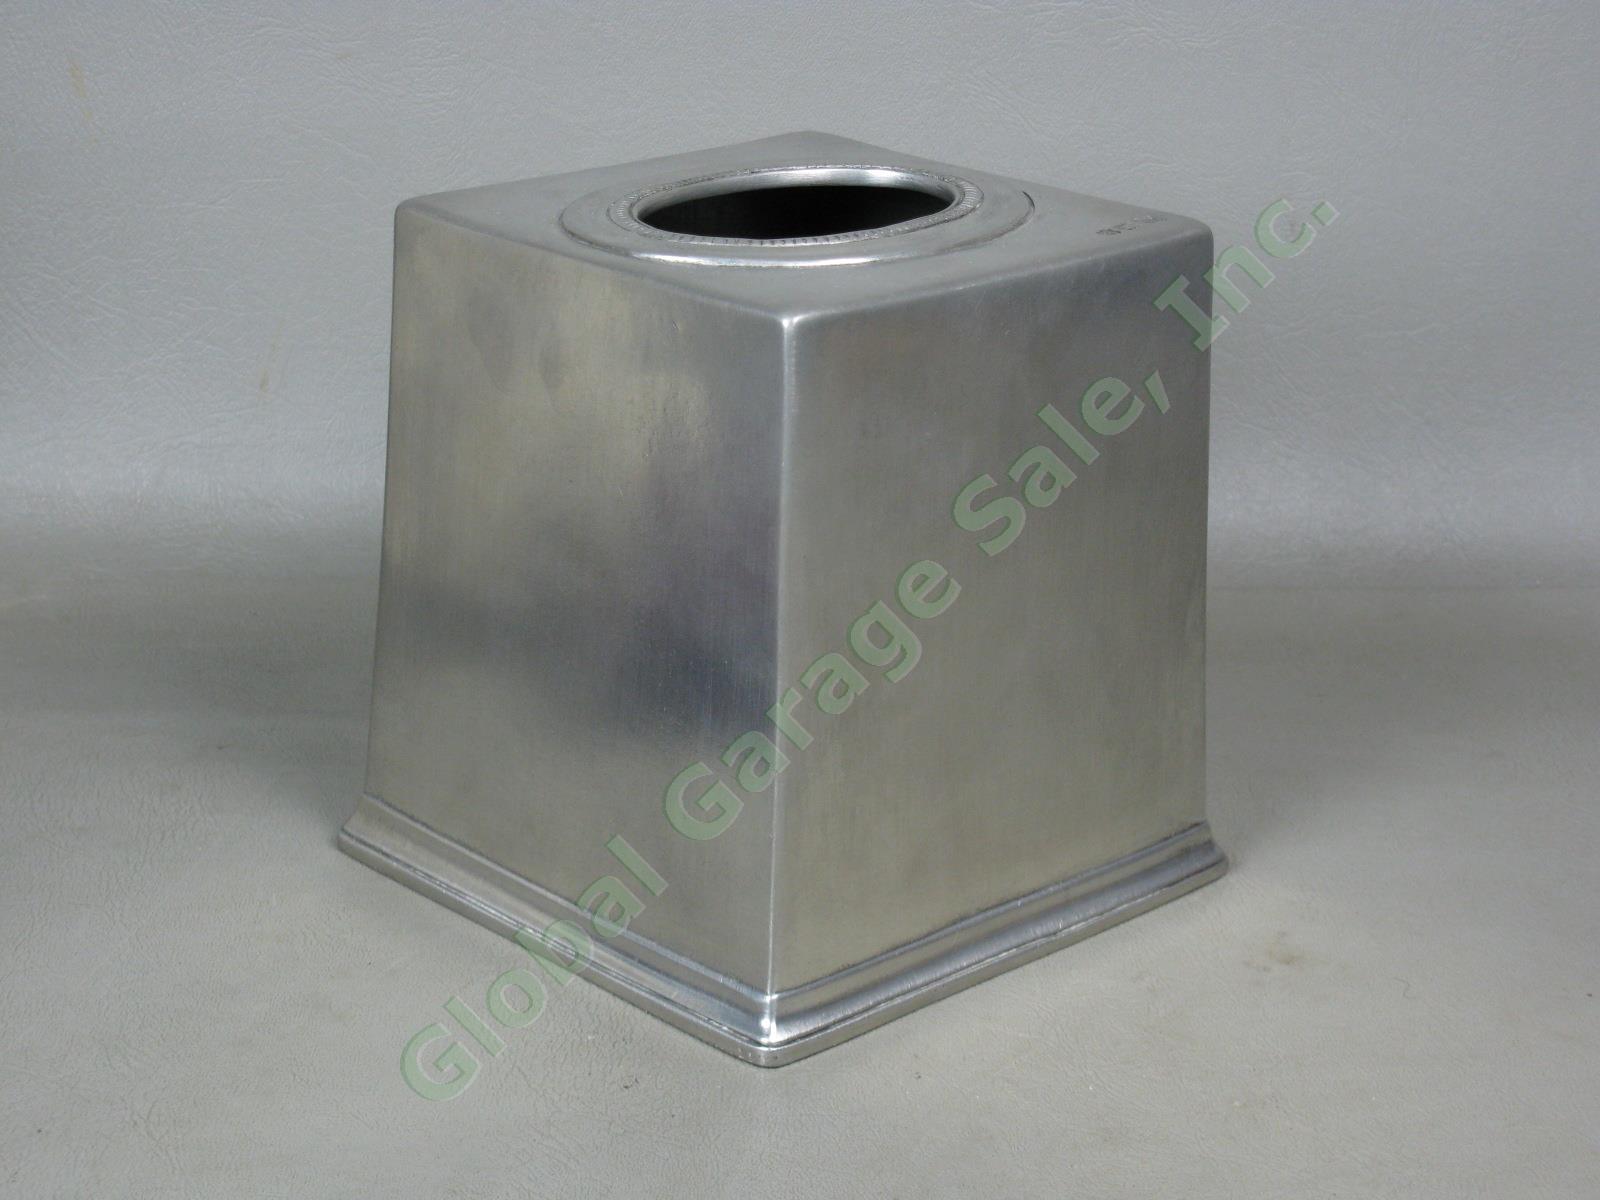 NEW Match Pewter Square Tissue Box Cover Holder Handmade In Italy Retail $280 NR 1